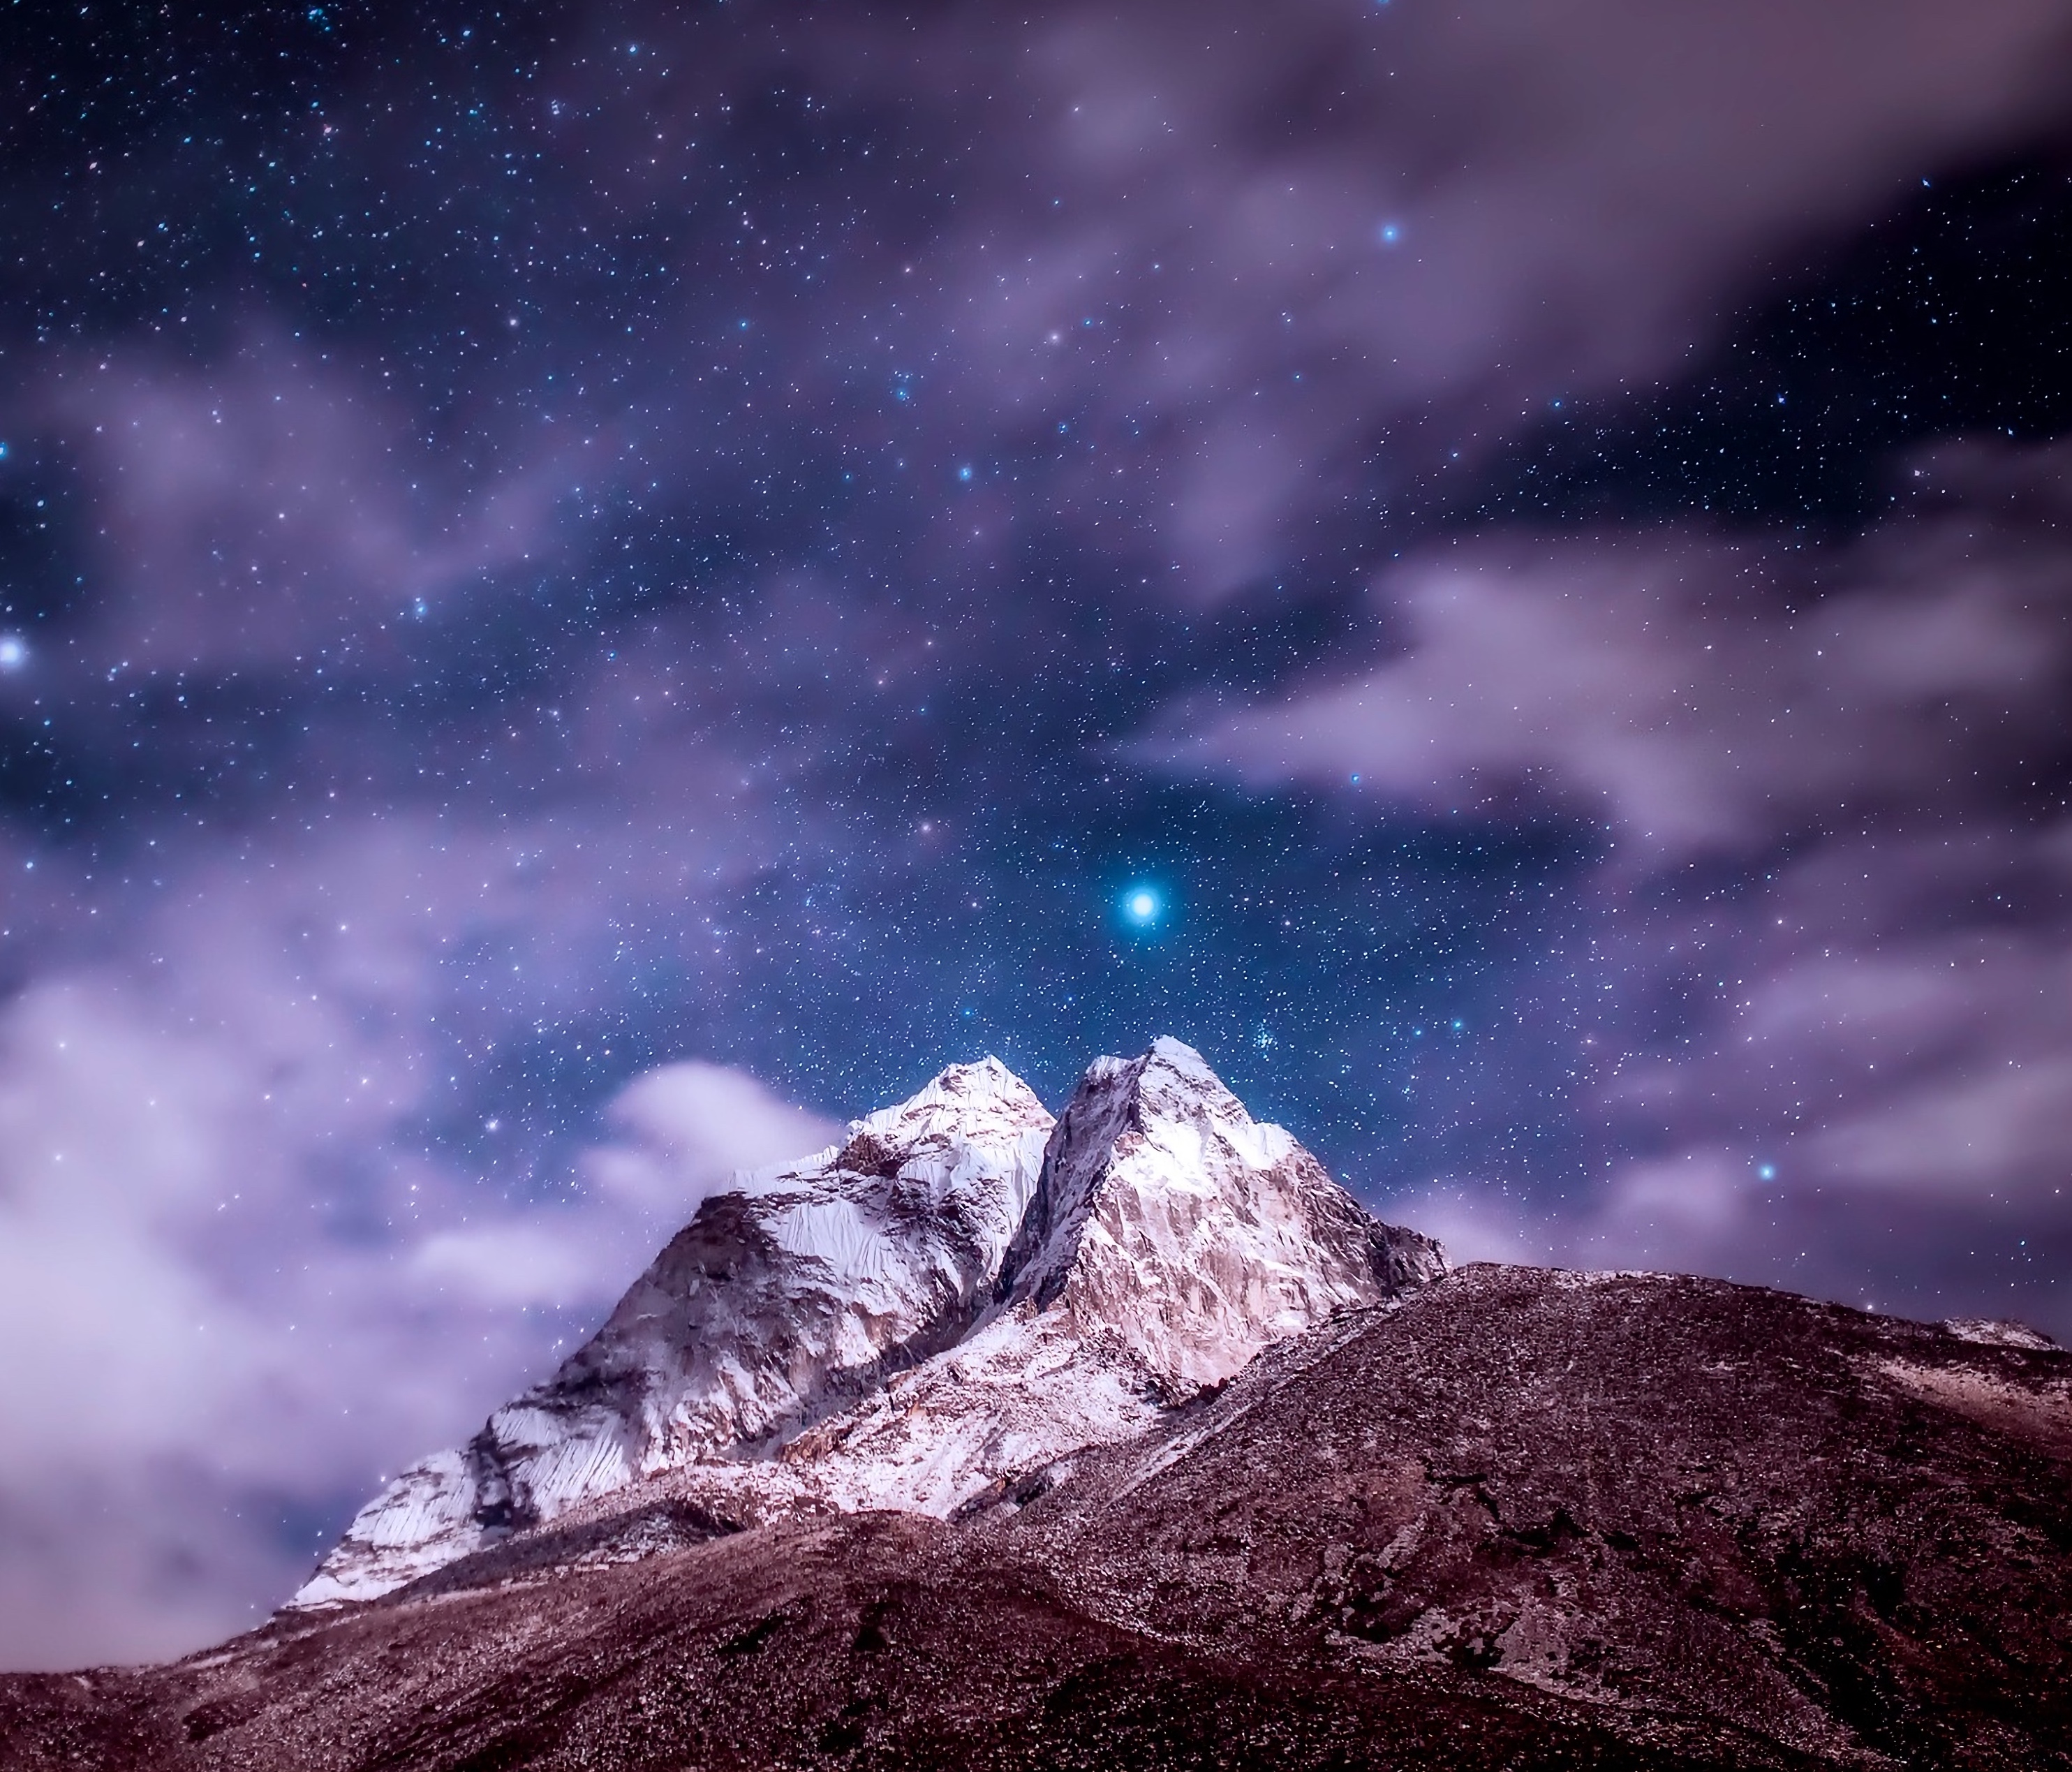 himalayas, starry sky, mountains, nature, clouds, vertex, top, snow covered, snowbound QHD